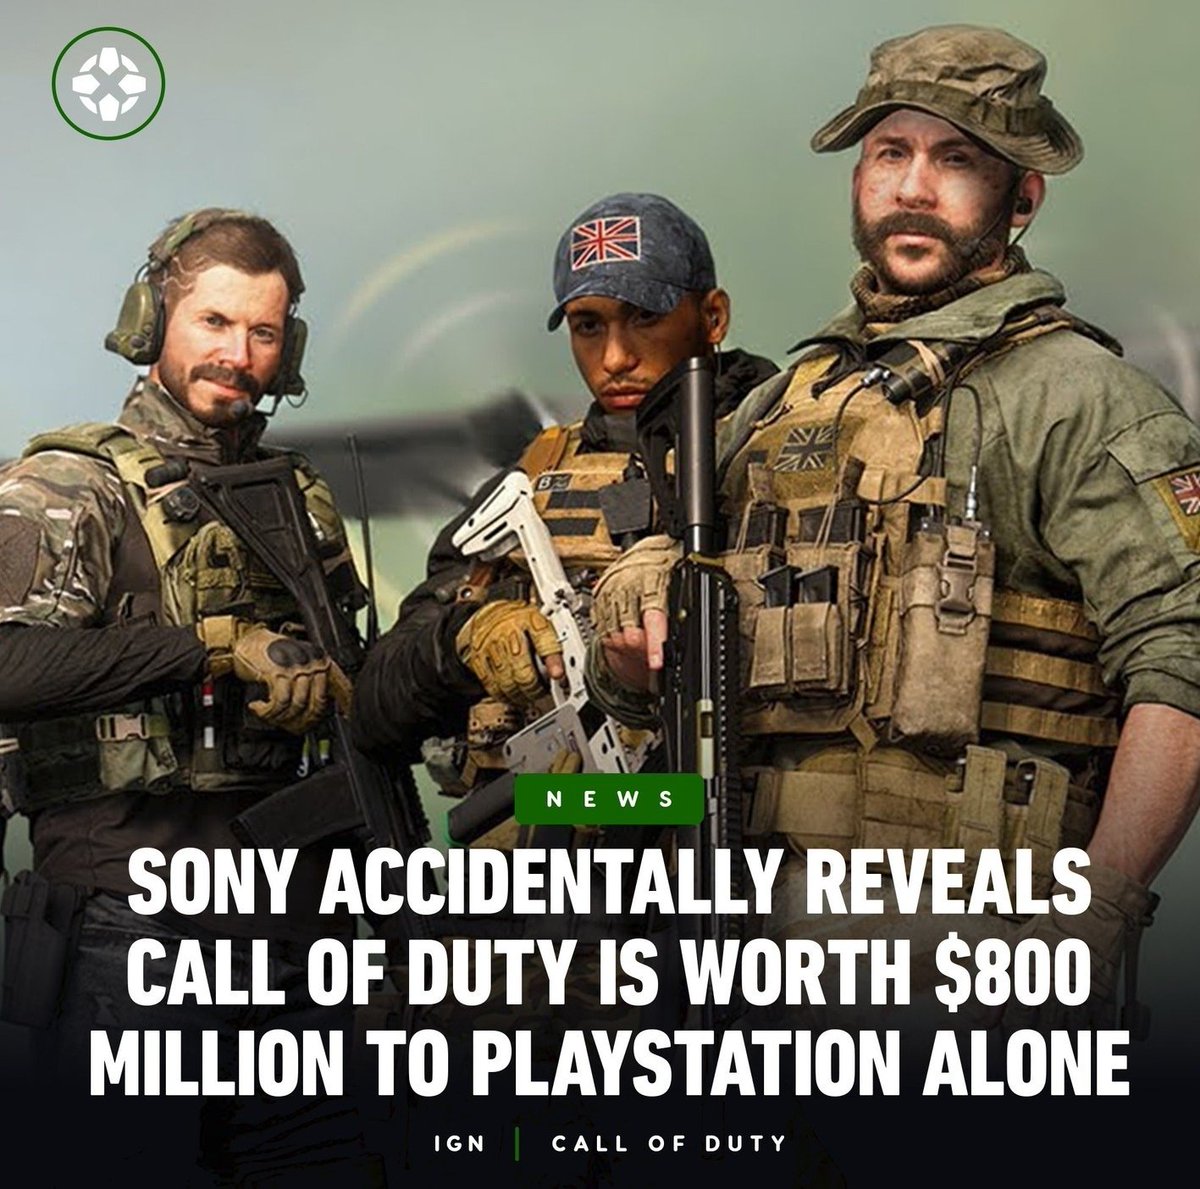 “PlayStation will be fine without #CallofDuty” https://t.co/dyqONqscPC